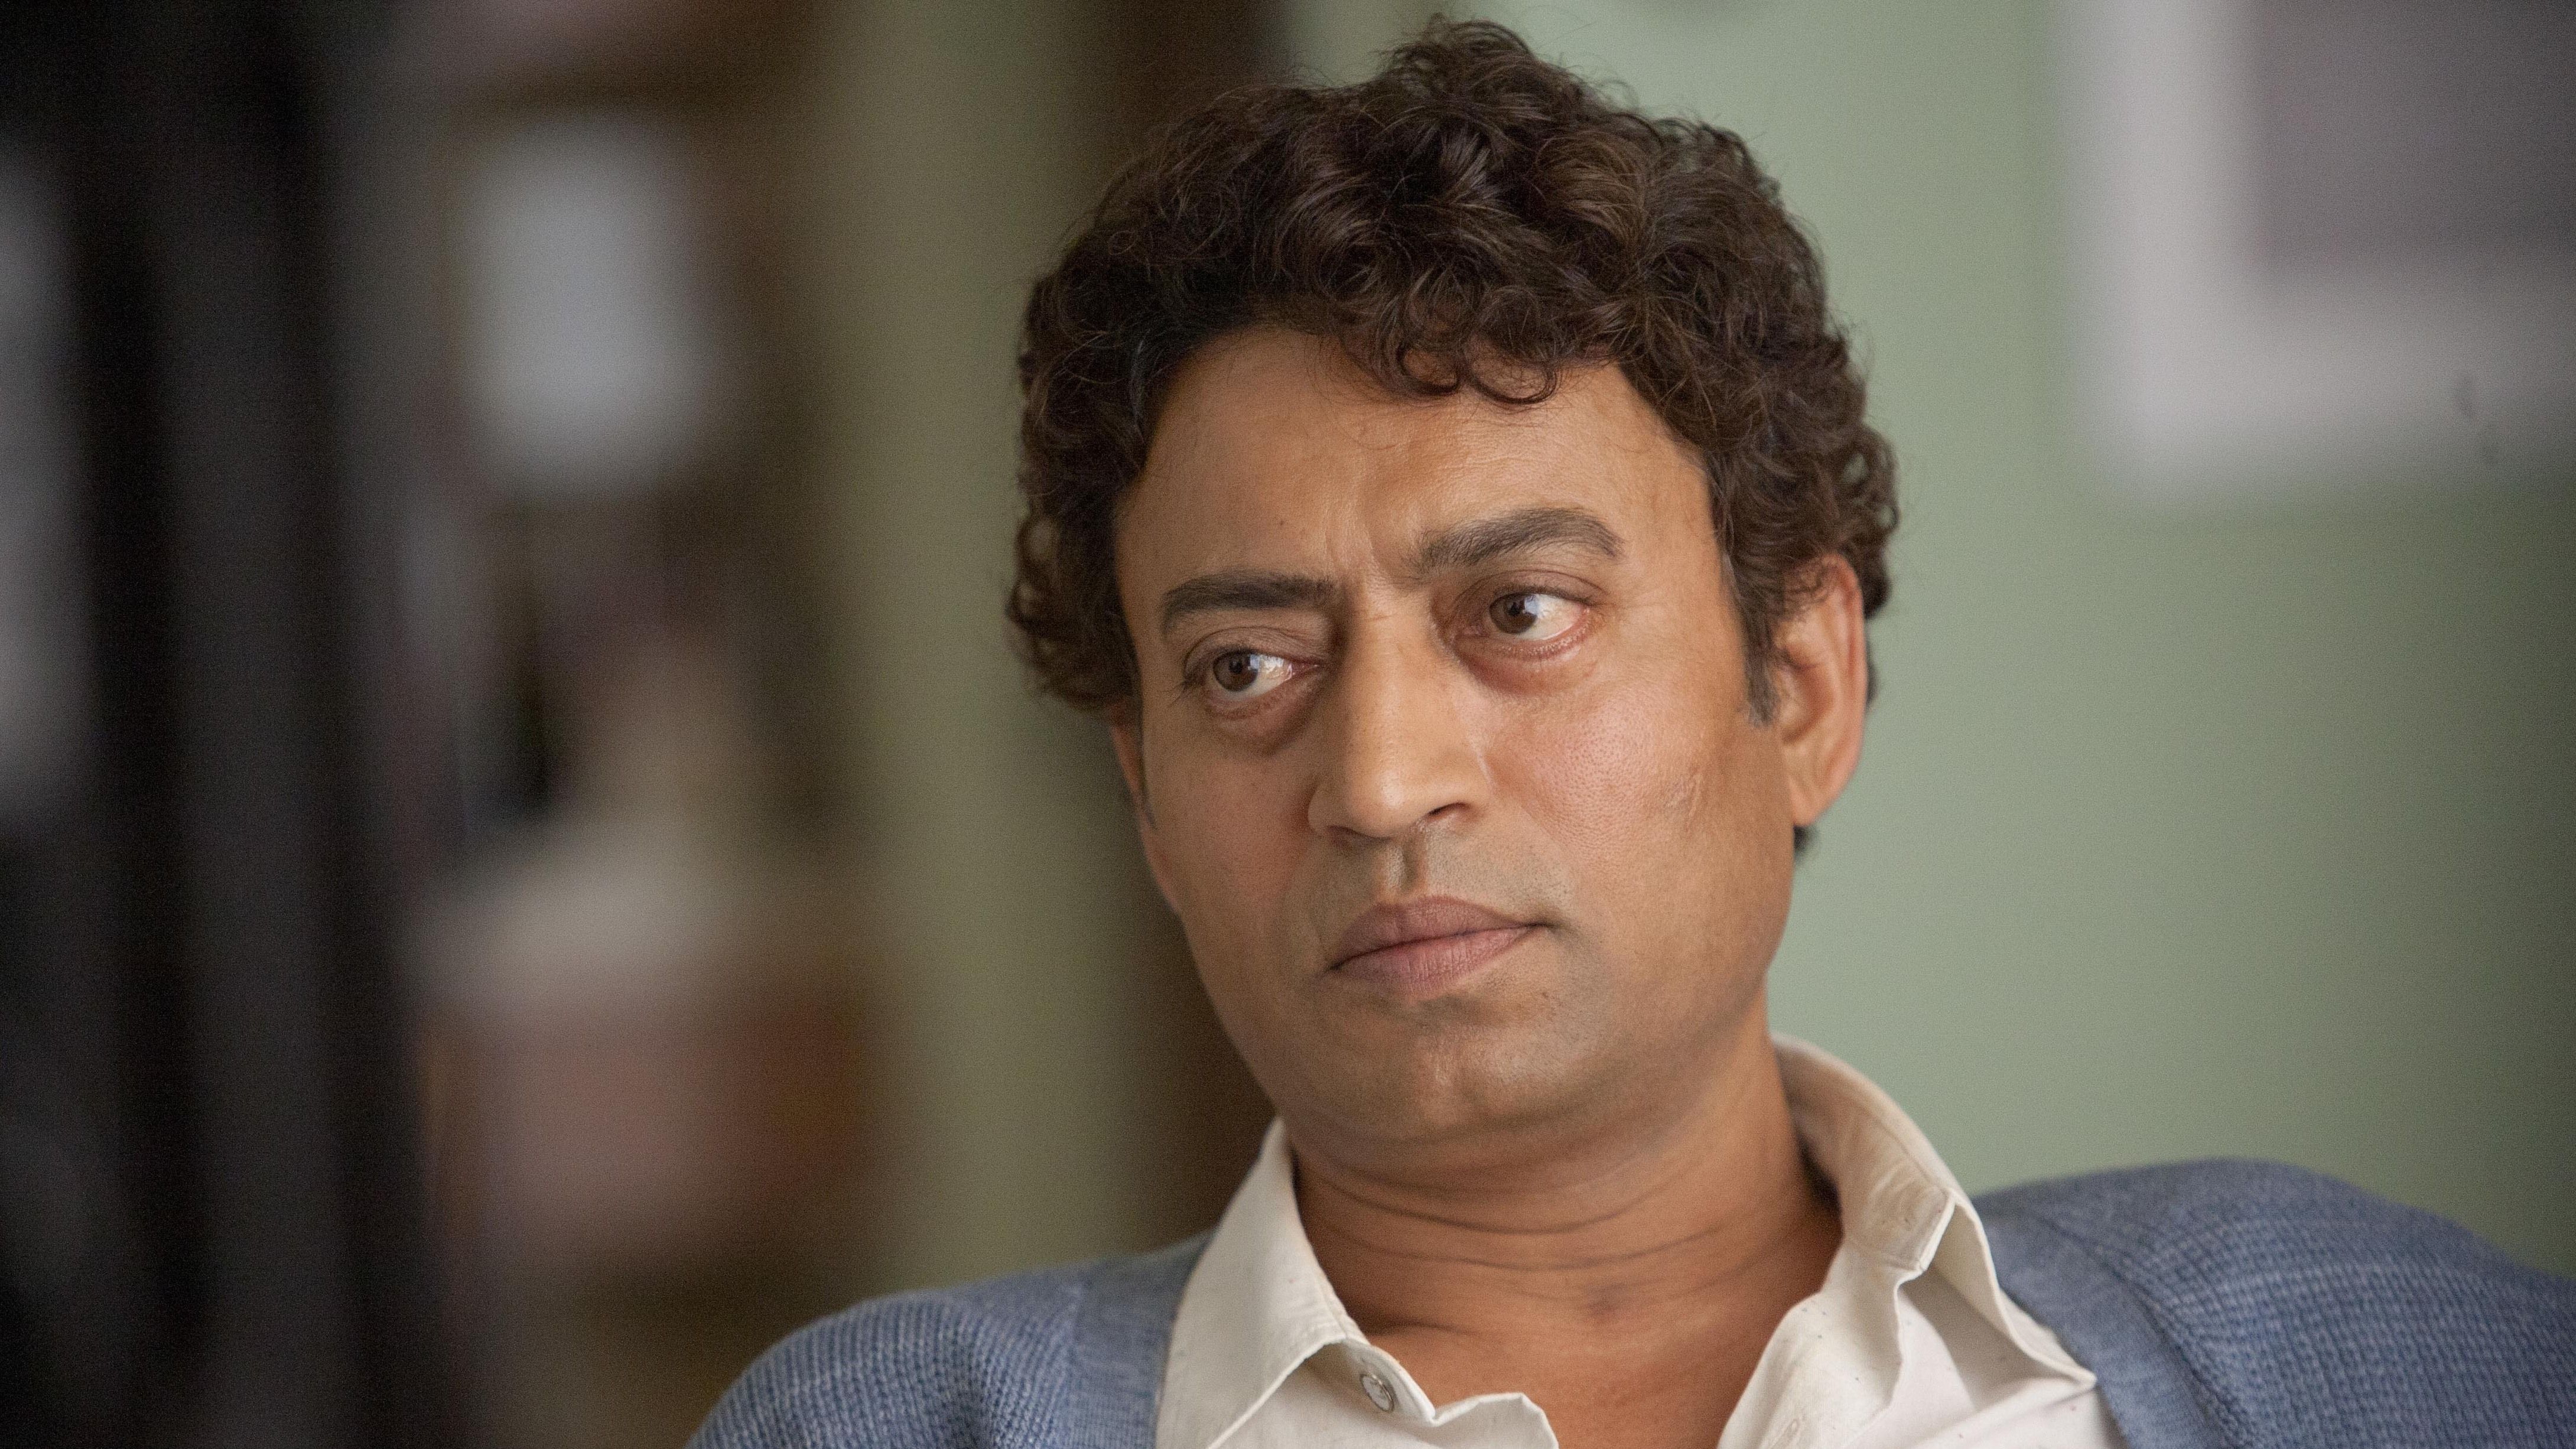 Irrfan Khan Wallpaper High Resolution and Quality Download